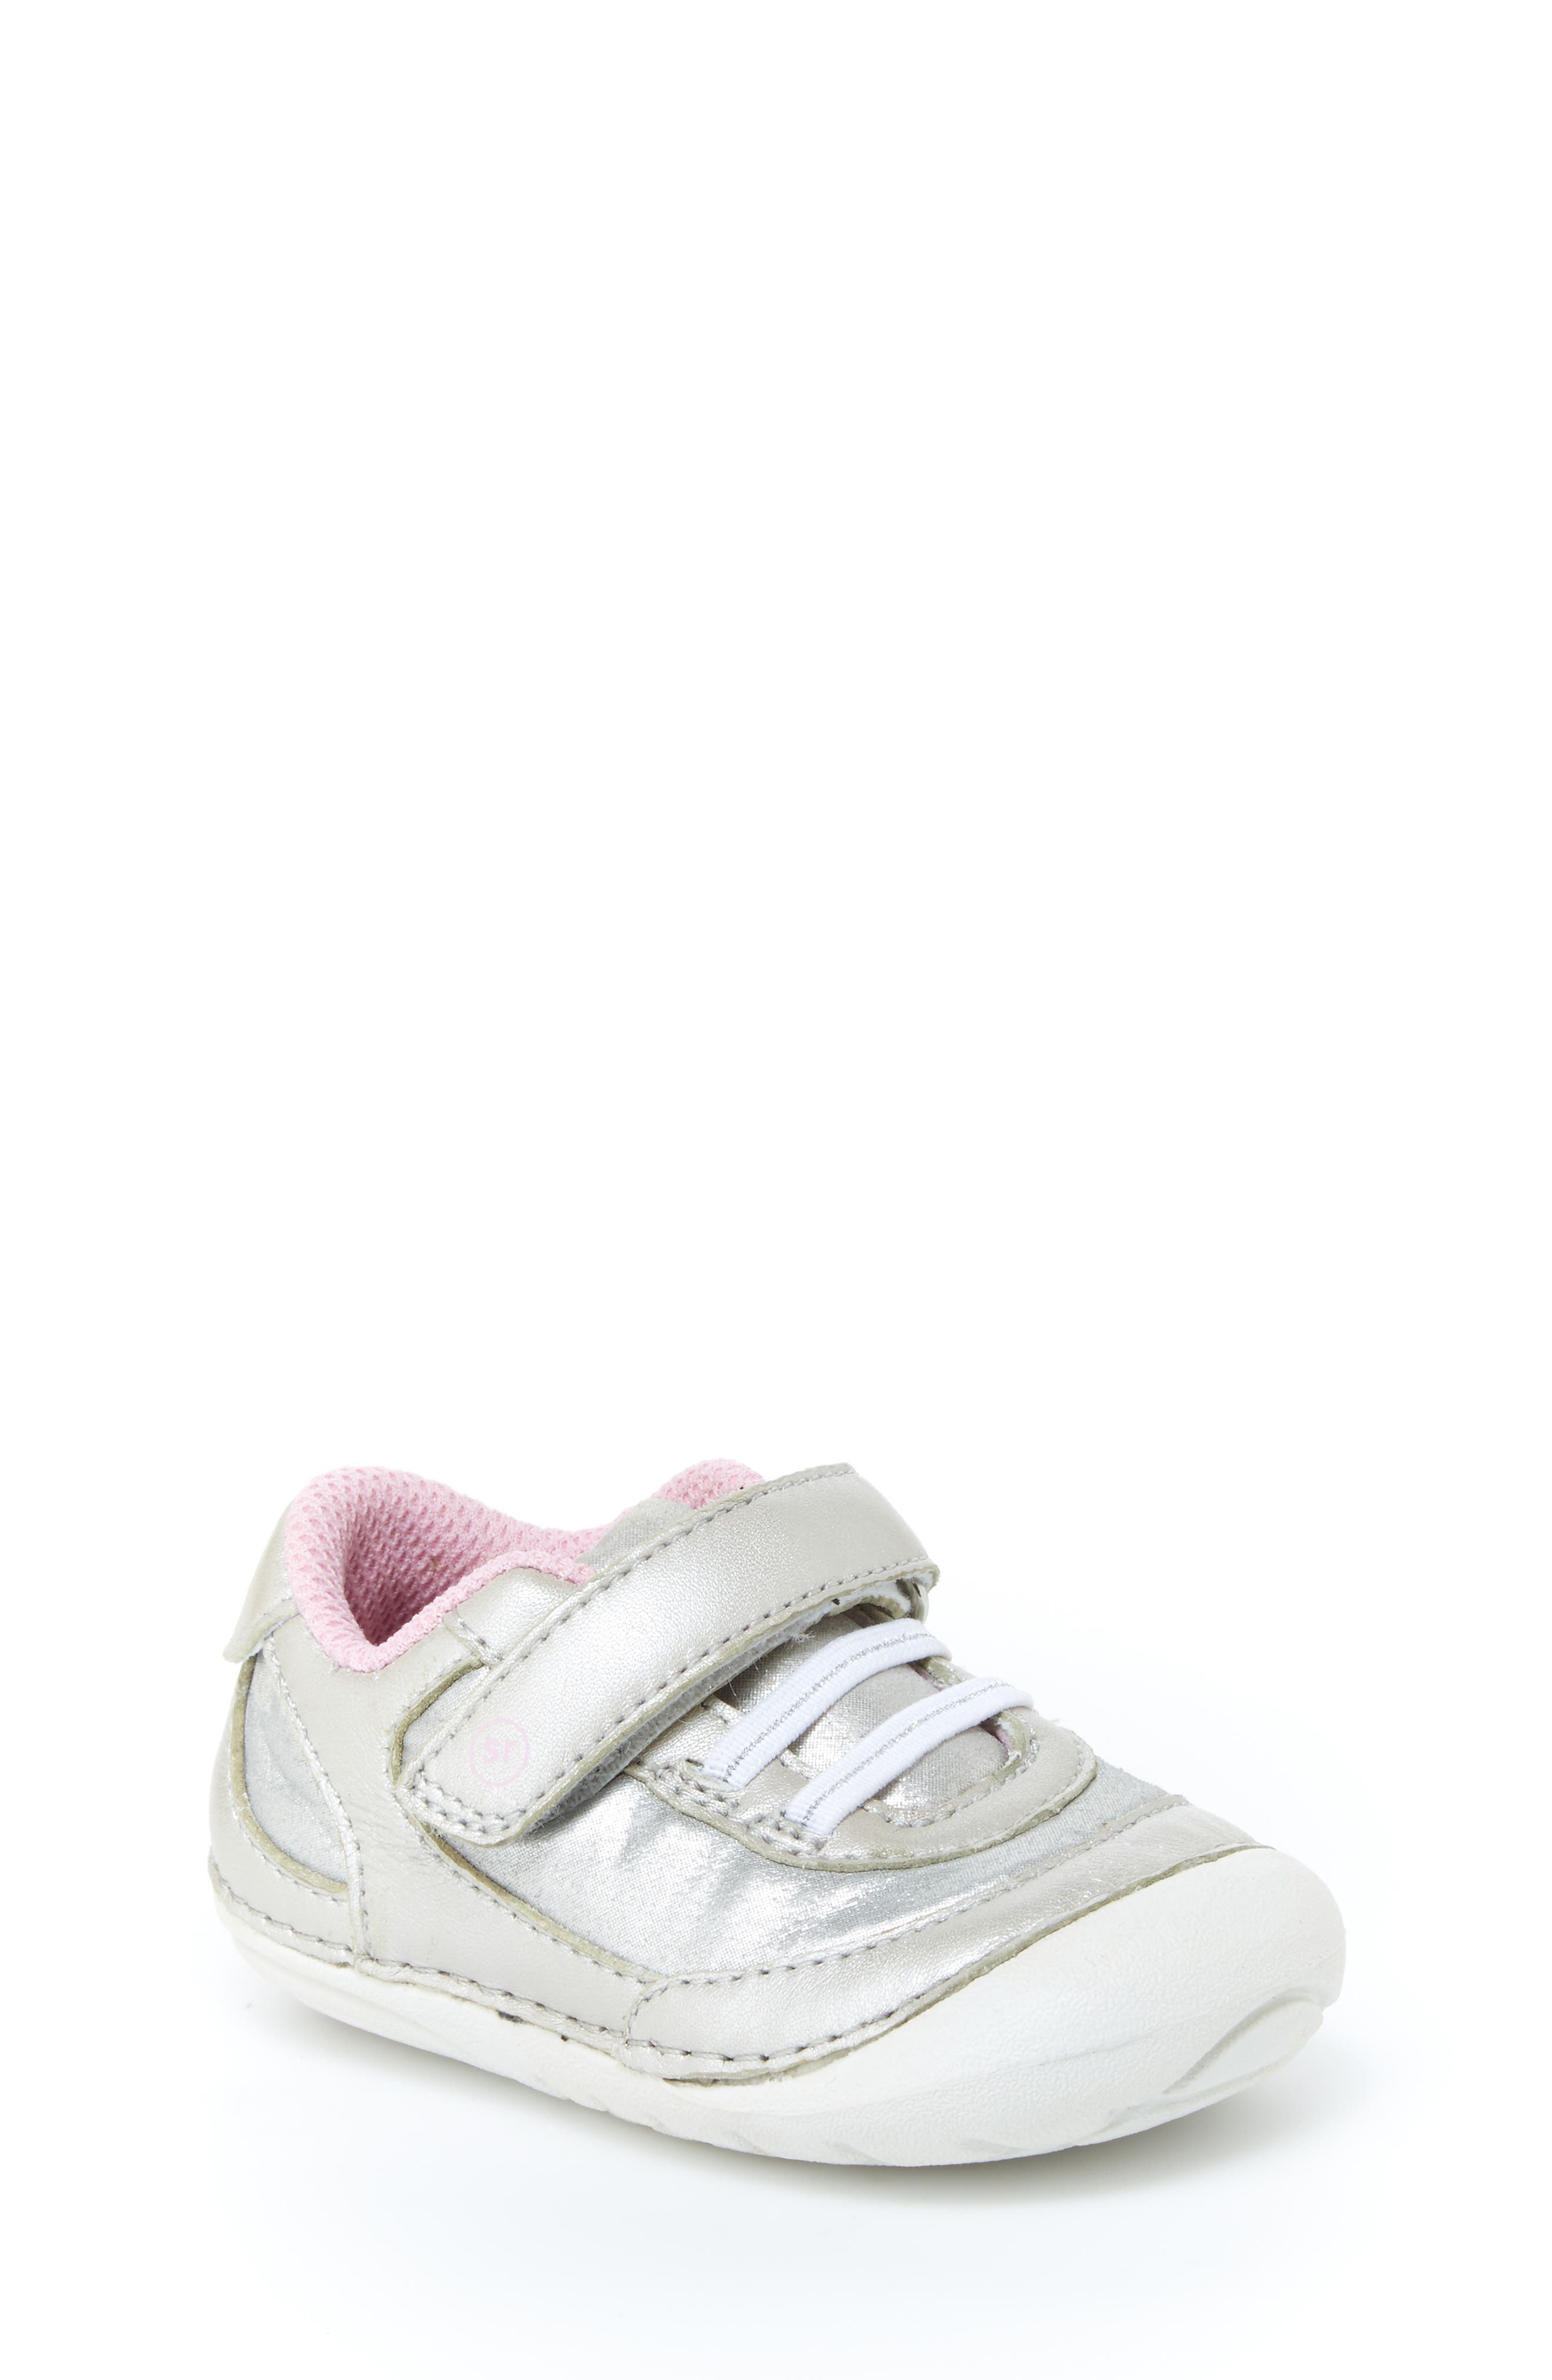 Baby Stride Rite's Shoes: First Walkers 